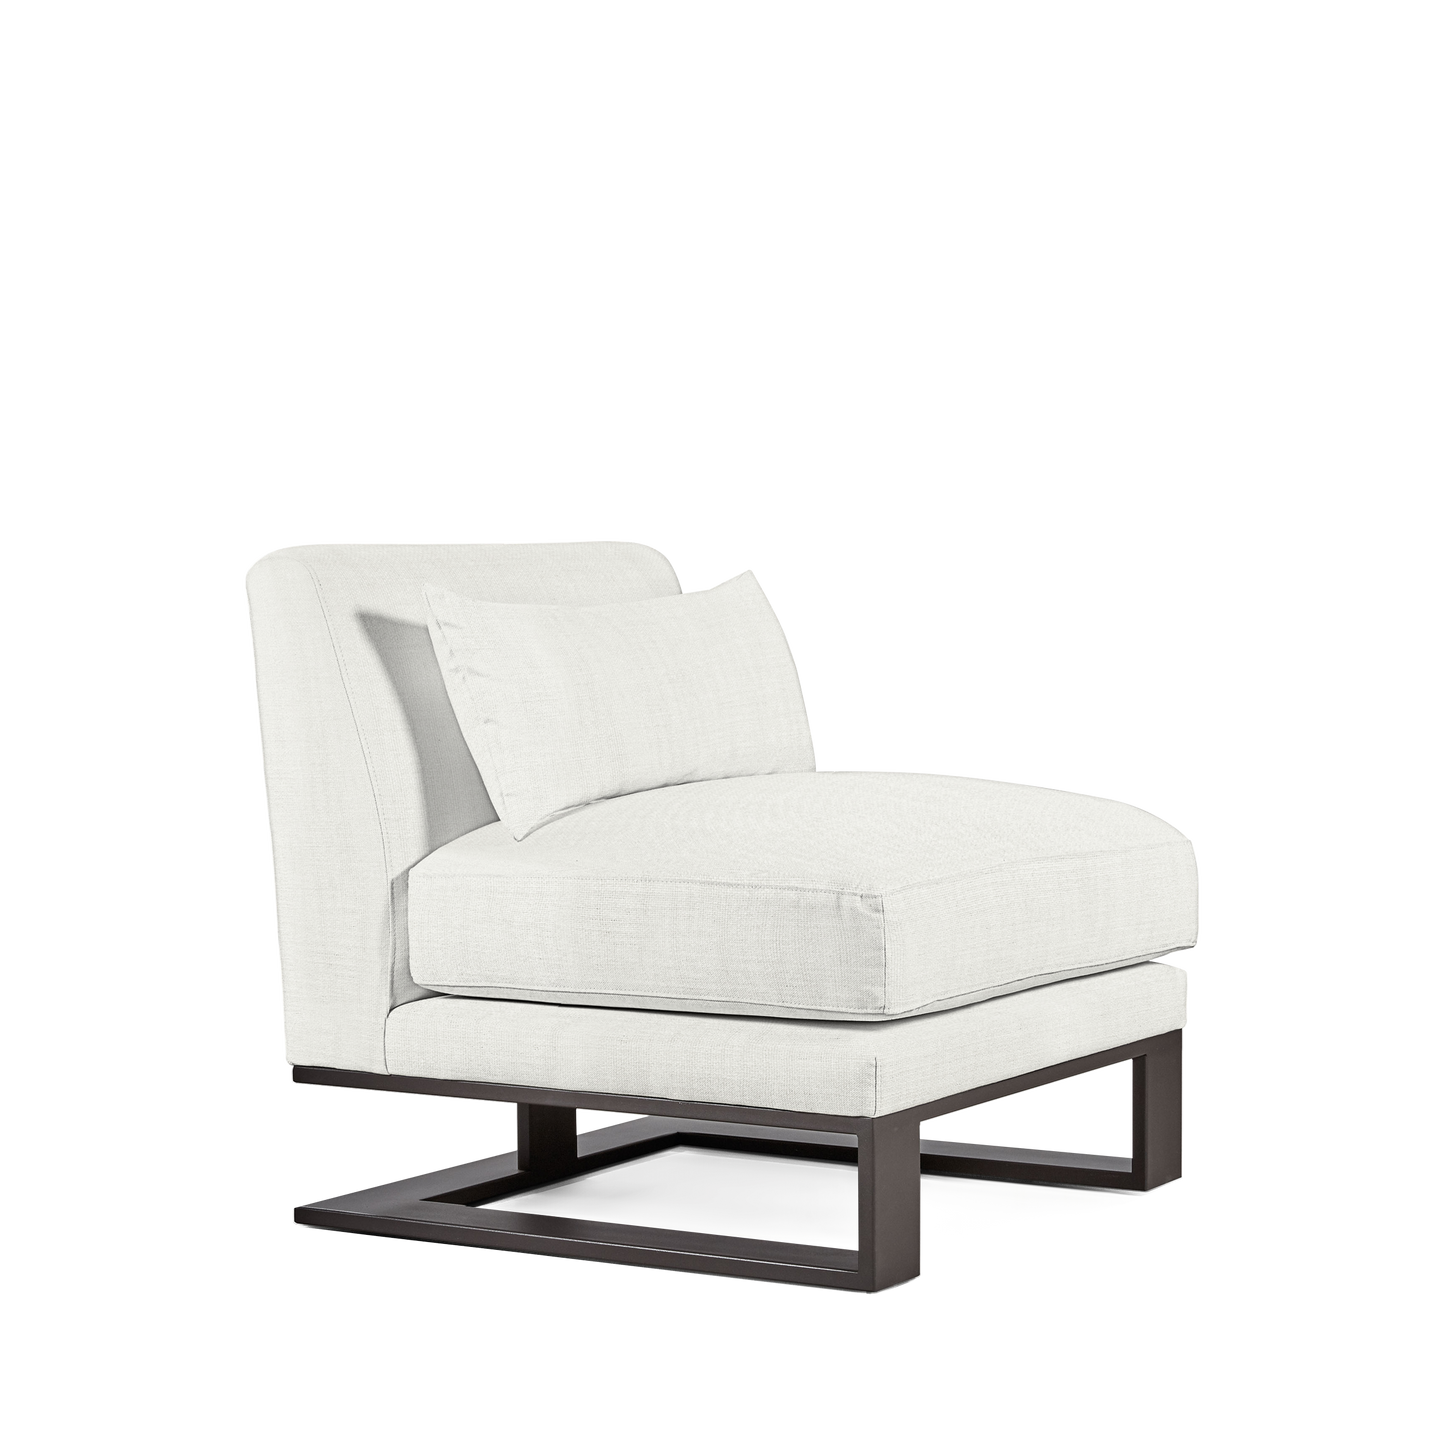 Alpes armchair with Rocco white textile and moka wood legs 